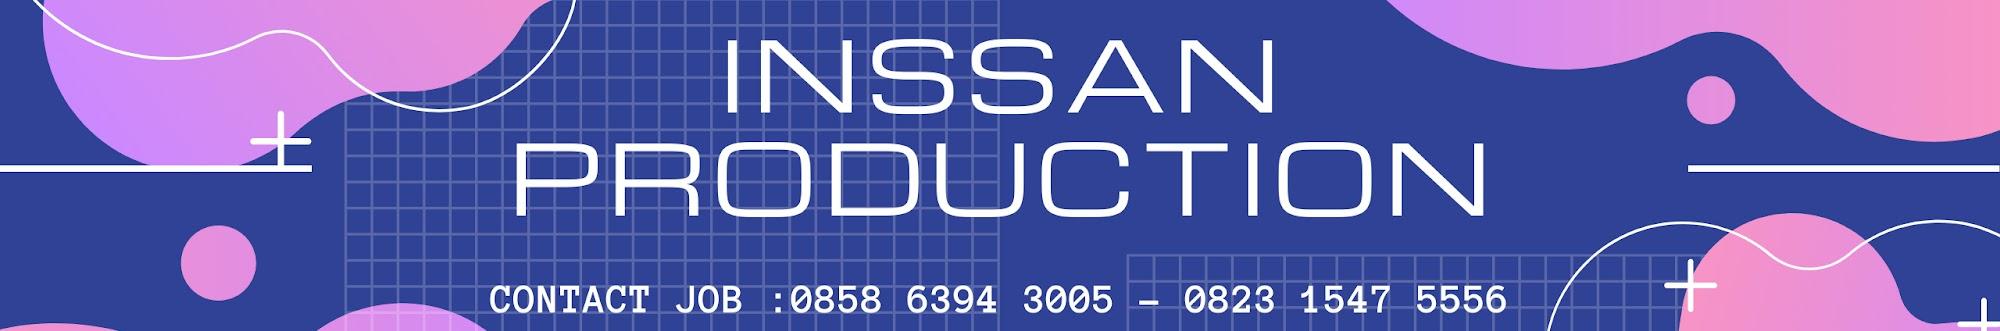 INSSAN PRODUCTION